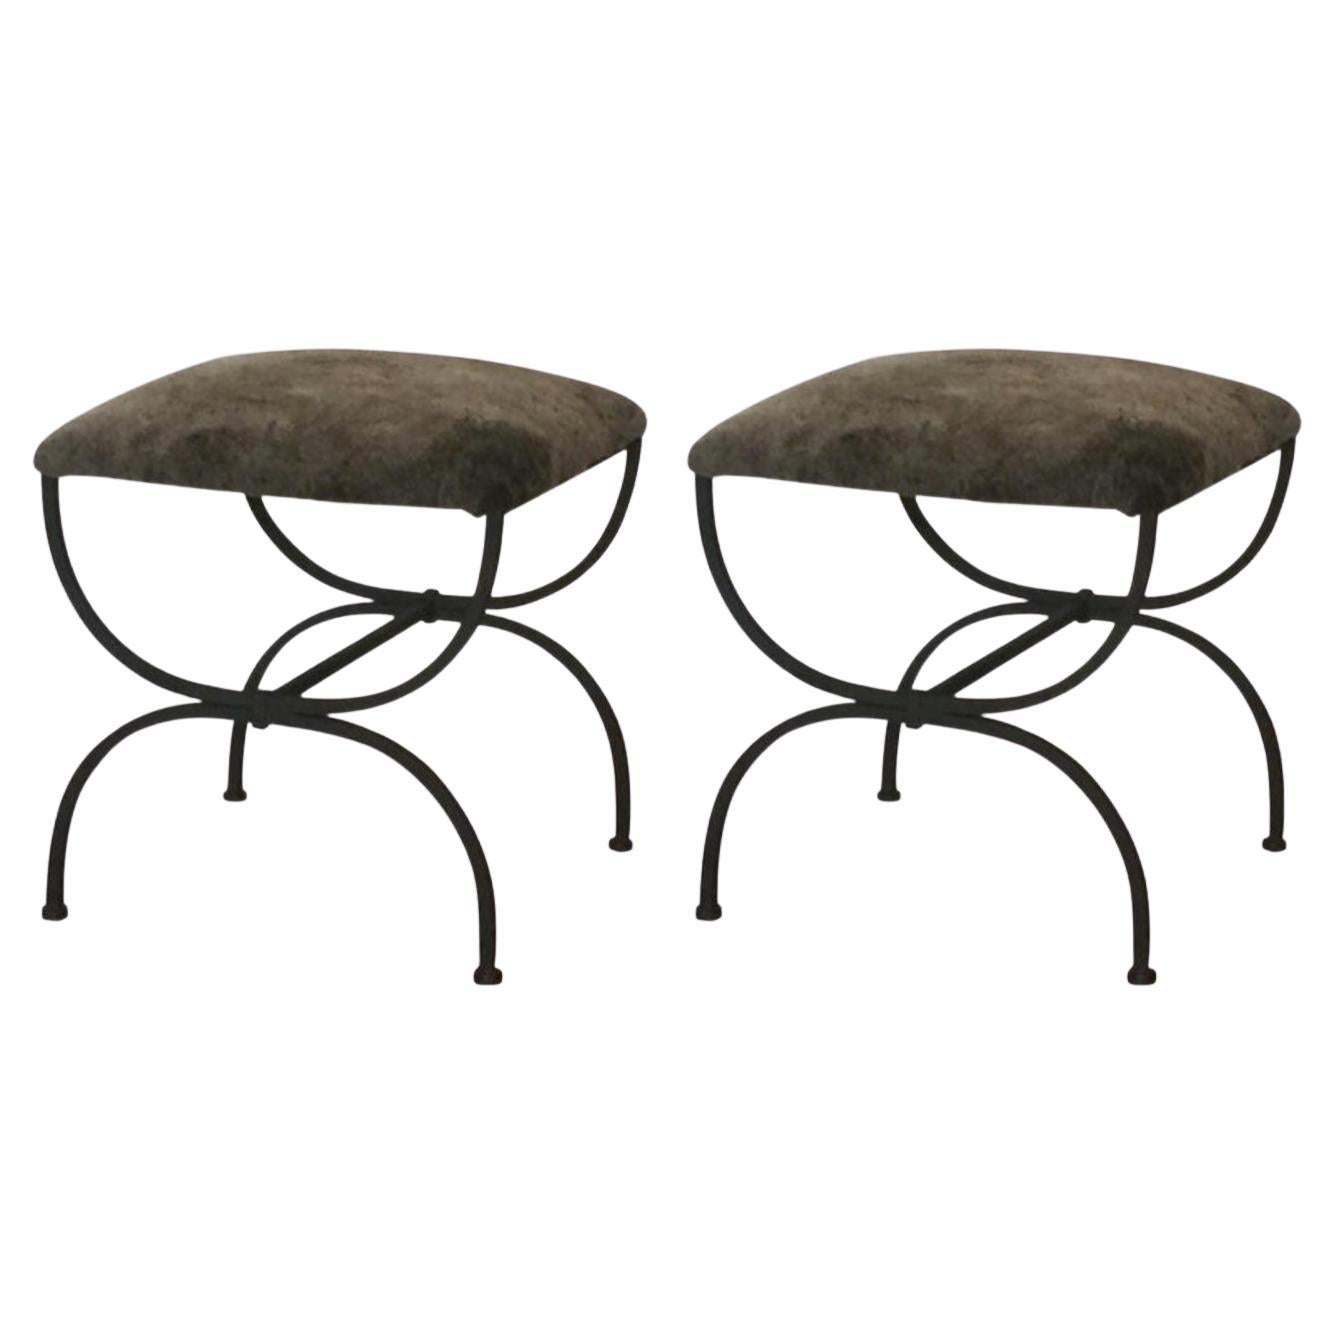 Pair of Gray Shearling 'Strapontin' Stools by Design Frères For Sale